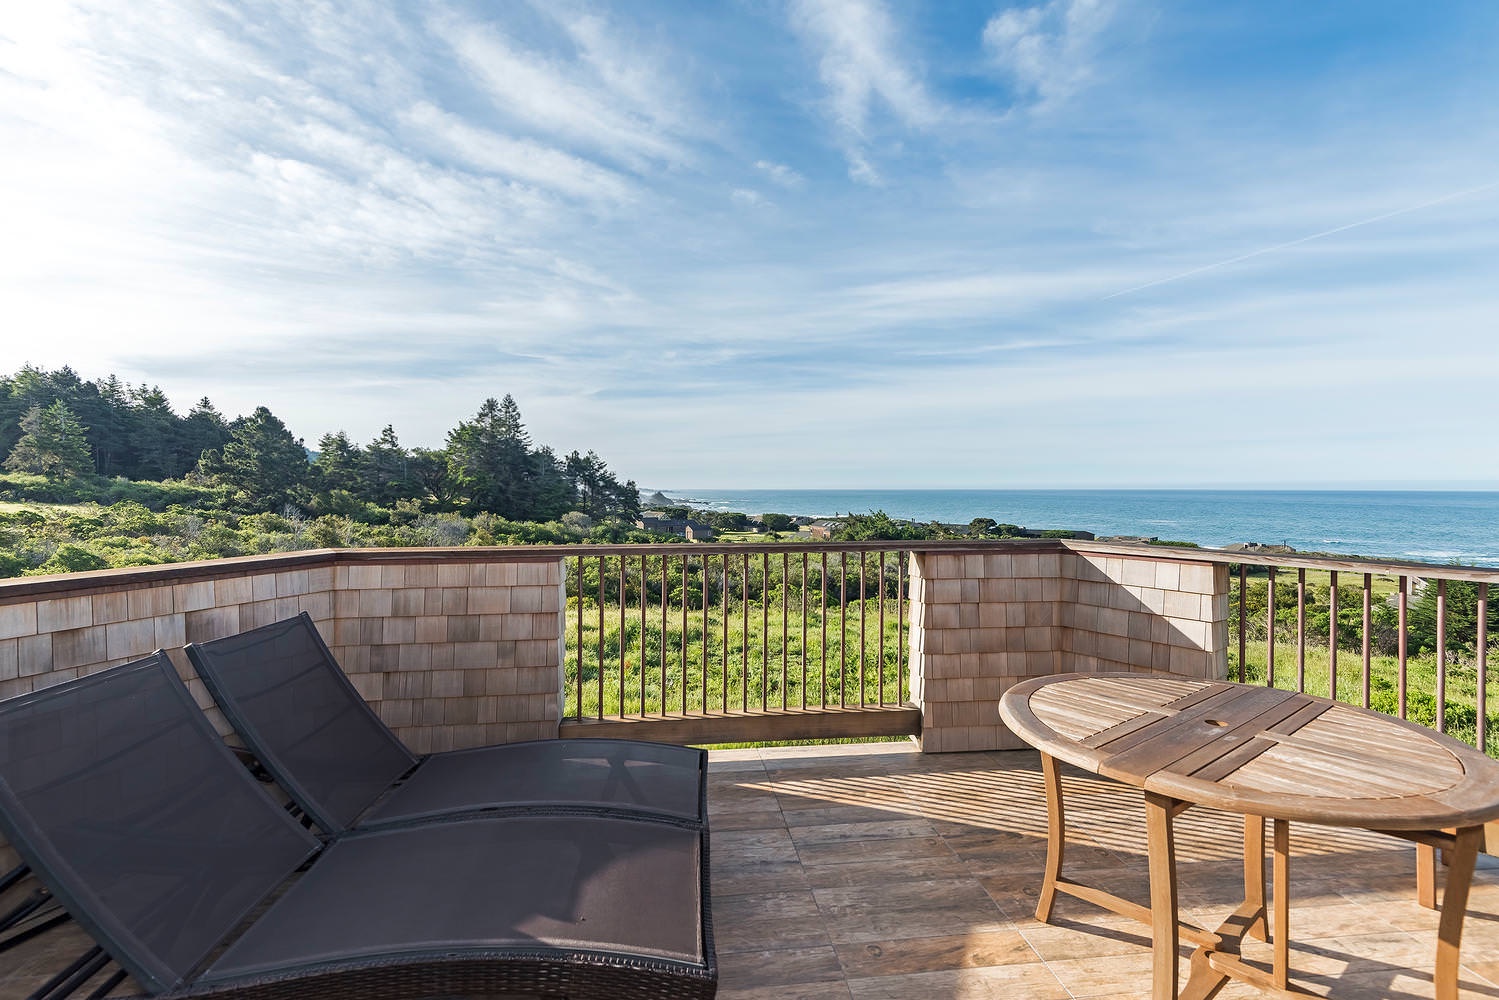 Patio furniture with ocean view